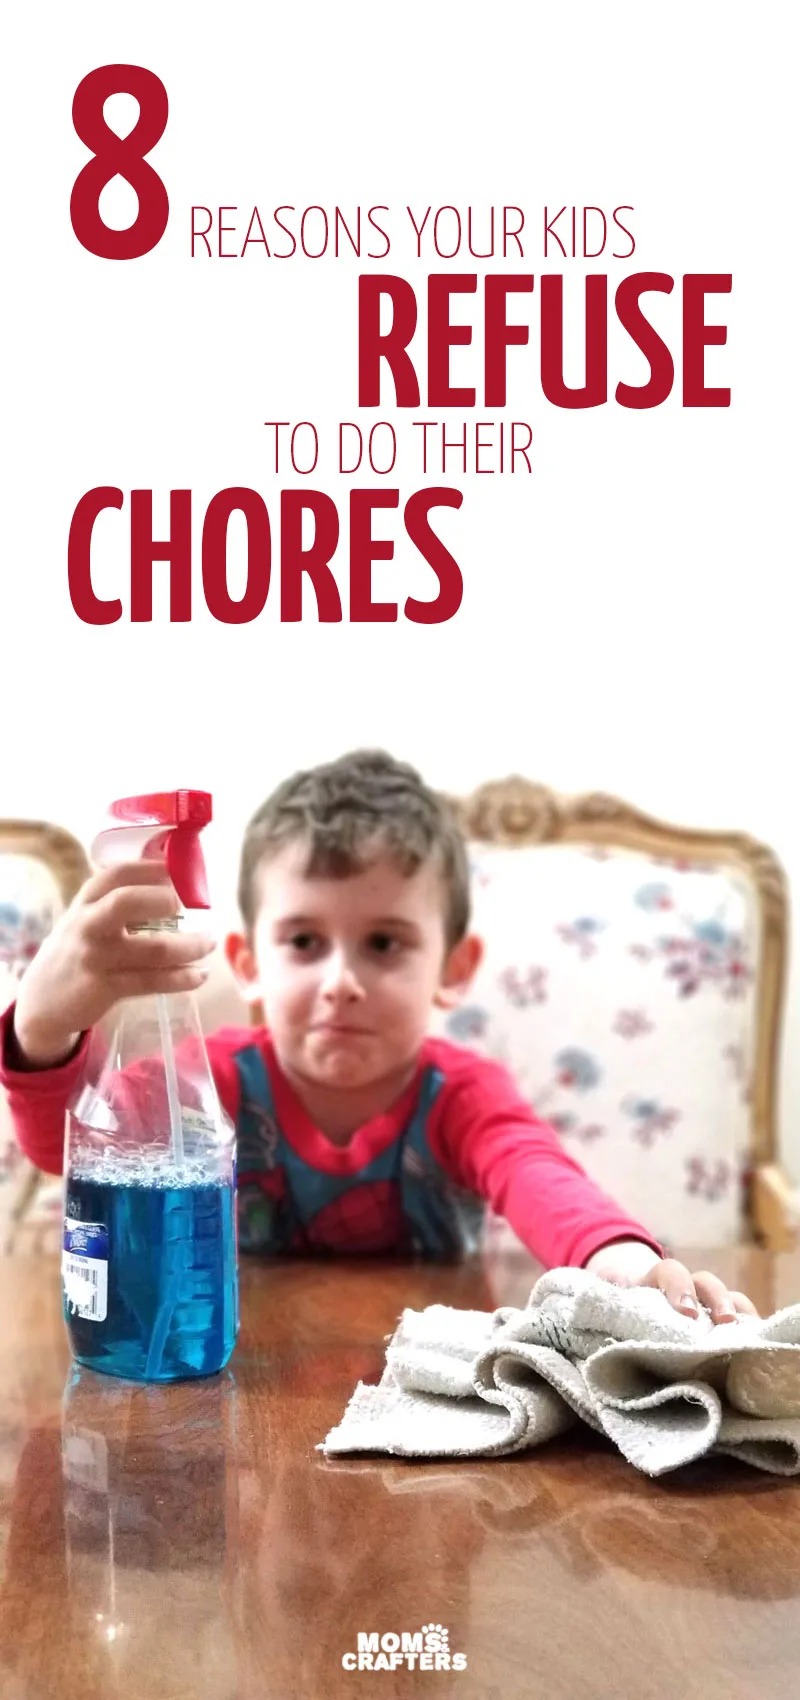 Learn how to get kids to do chores with some easy parenting tips and tricks - beyond reward charts and chore charts! Great tips for cleaning up for toddlers and preschoolers.